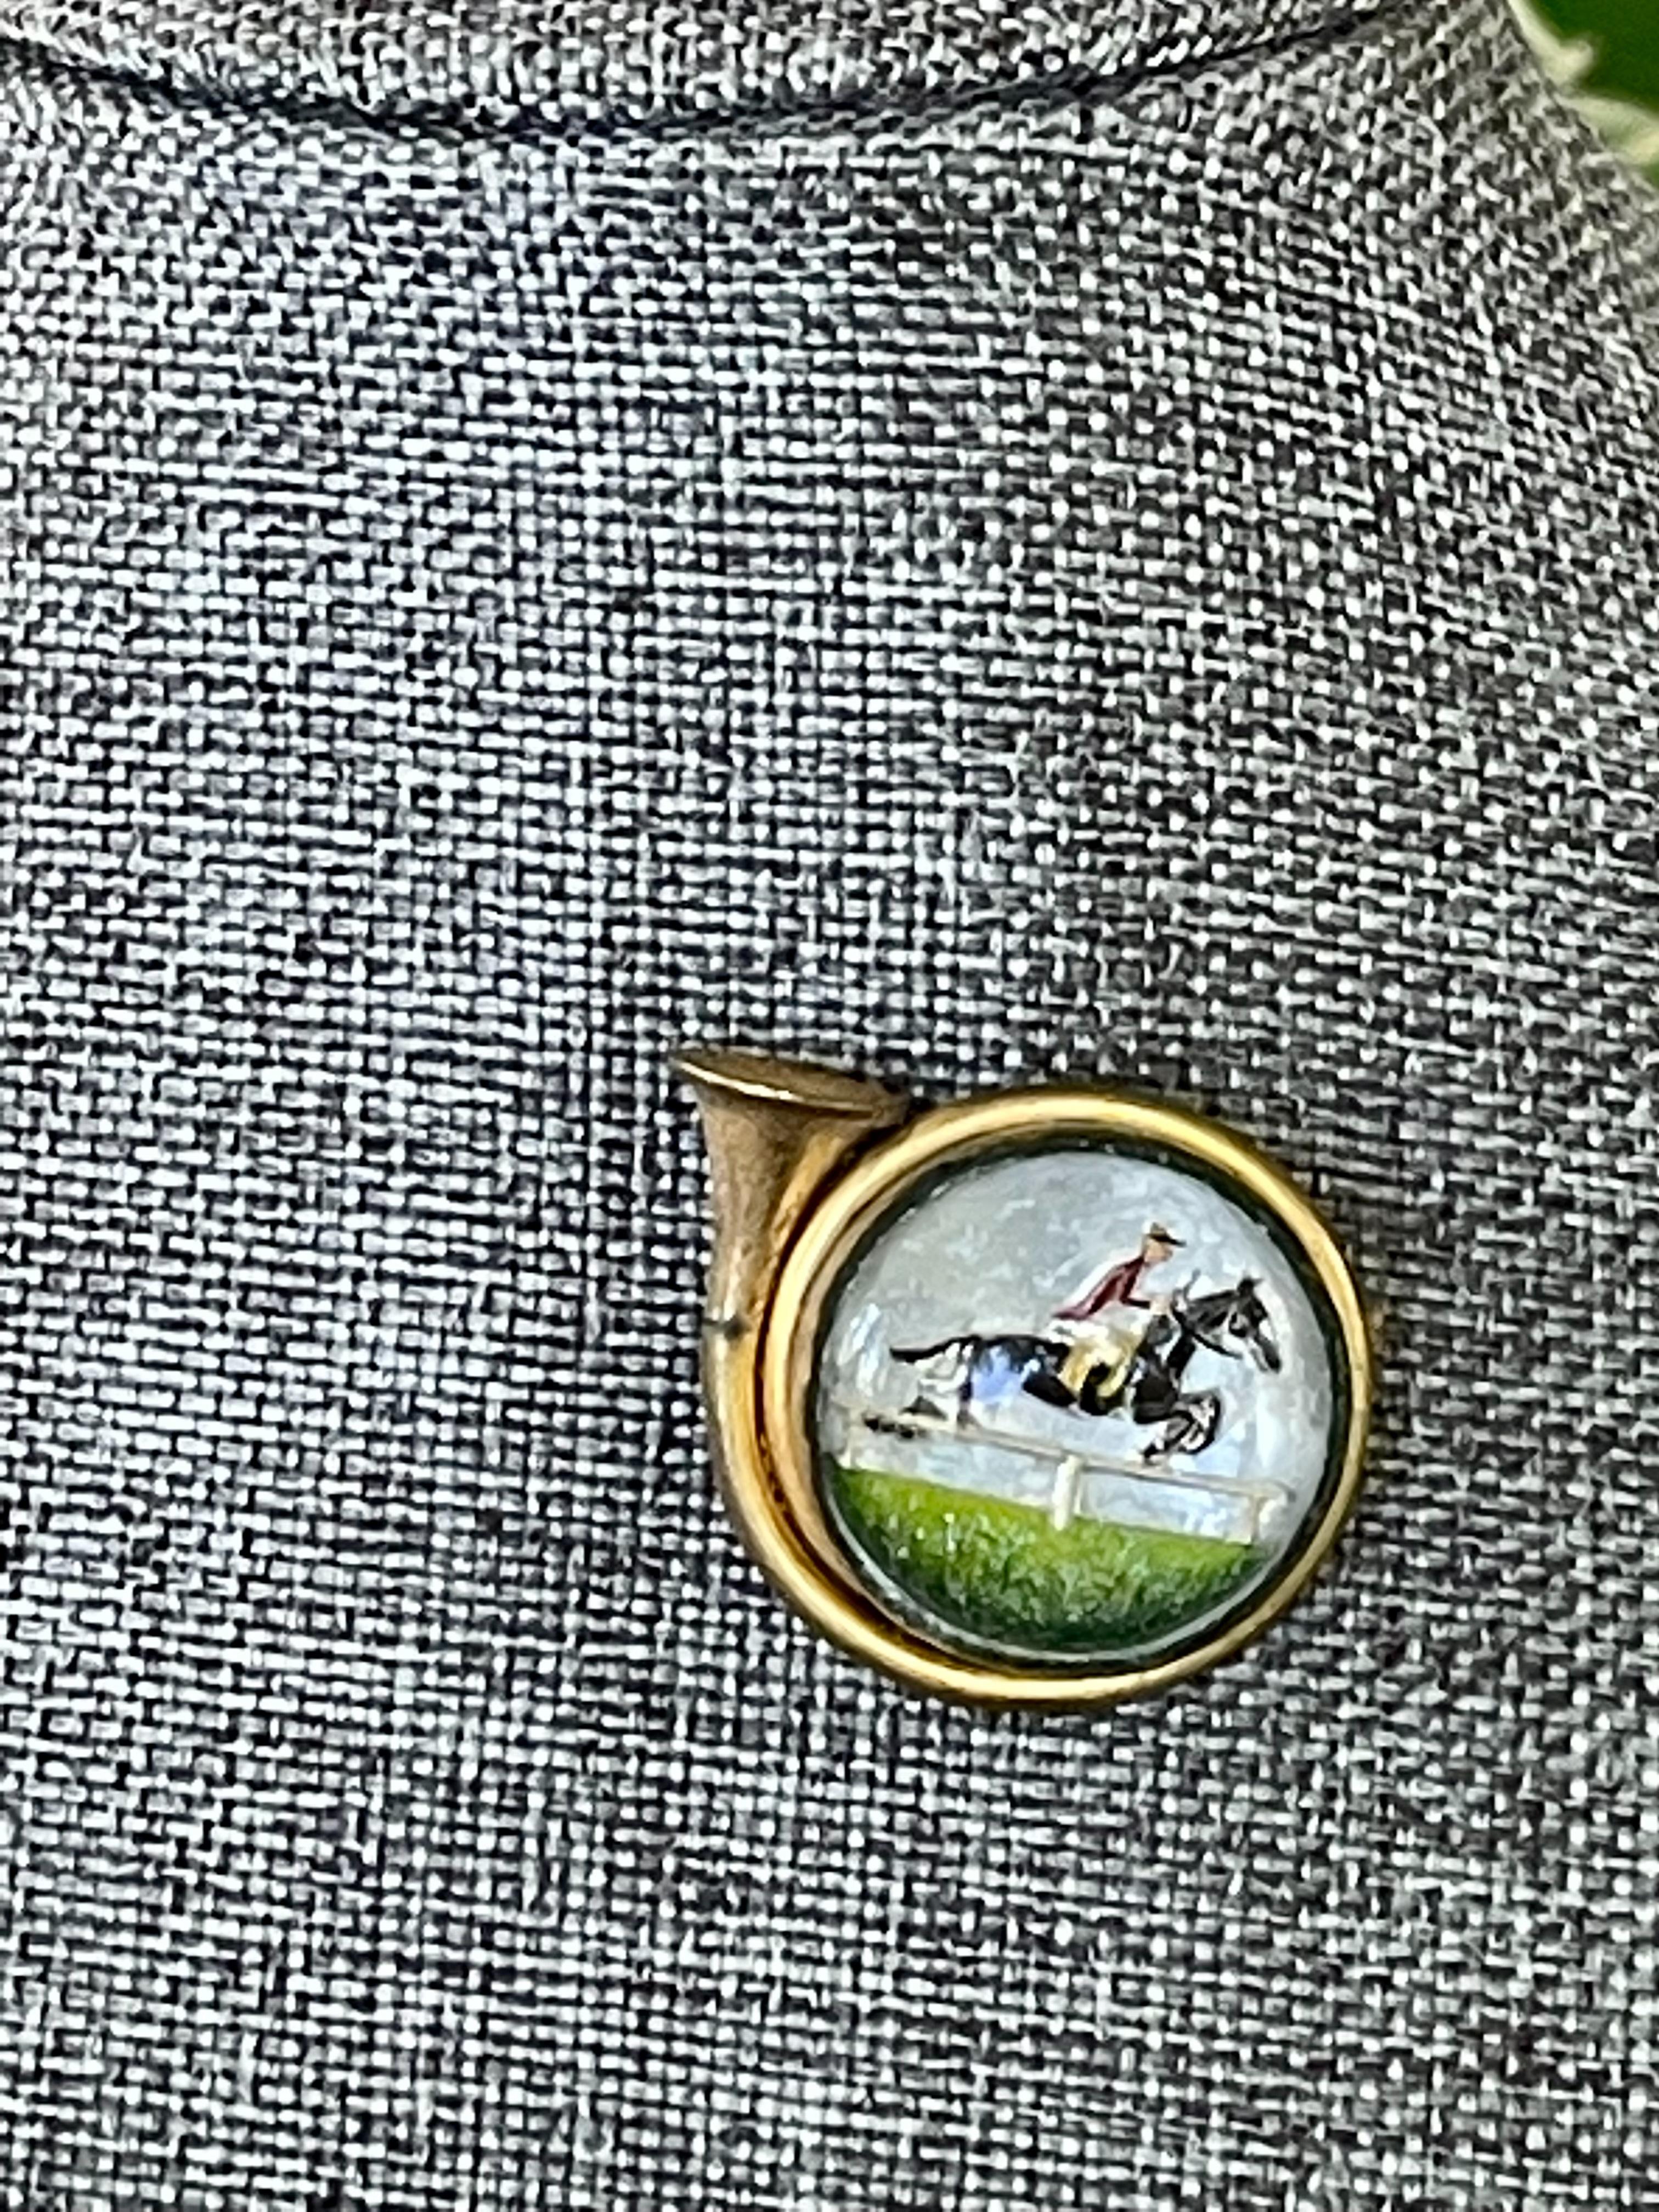 Cabochon Vintage French Horn Reverse Painted Essex Crystal Brooch Pin with Horse, Rider For Sale